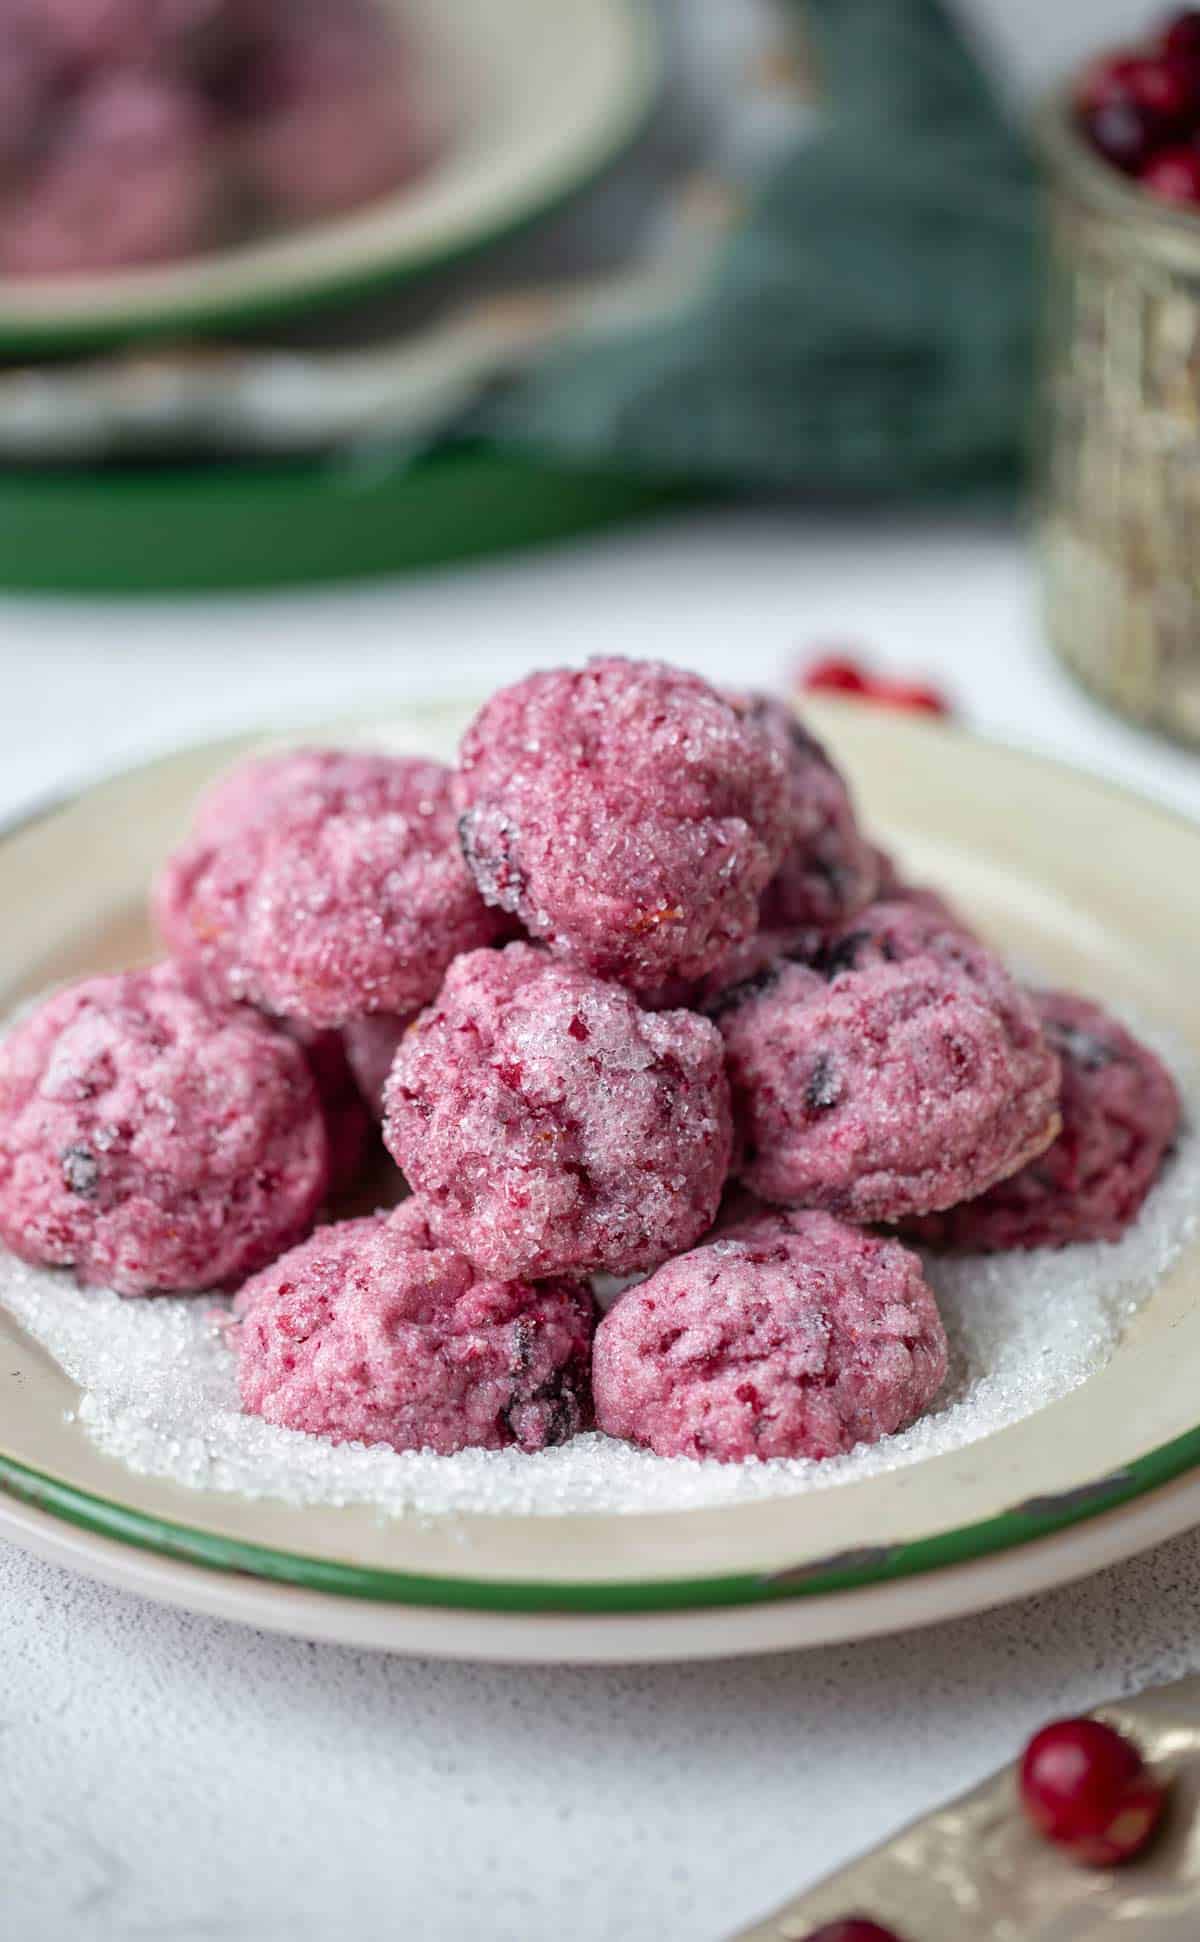 Sparkling Sugar Plum Cranberry Cookies are a soft chewy cranberry orange cookie recipe made from frozen or fresh cranberries baked with orange zest and dried cranberries. cranberry cookies | cranberry orange cookies | cranberry cookies recipe | sugarplum | sugar plum cookies